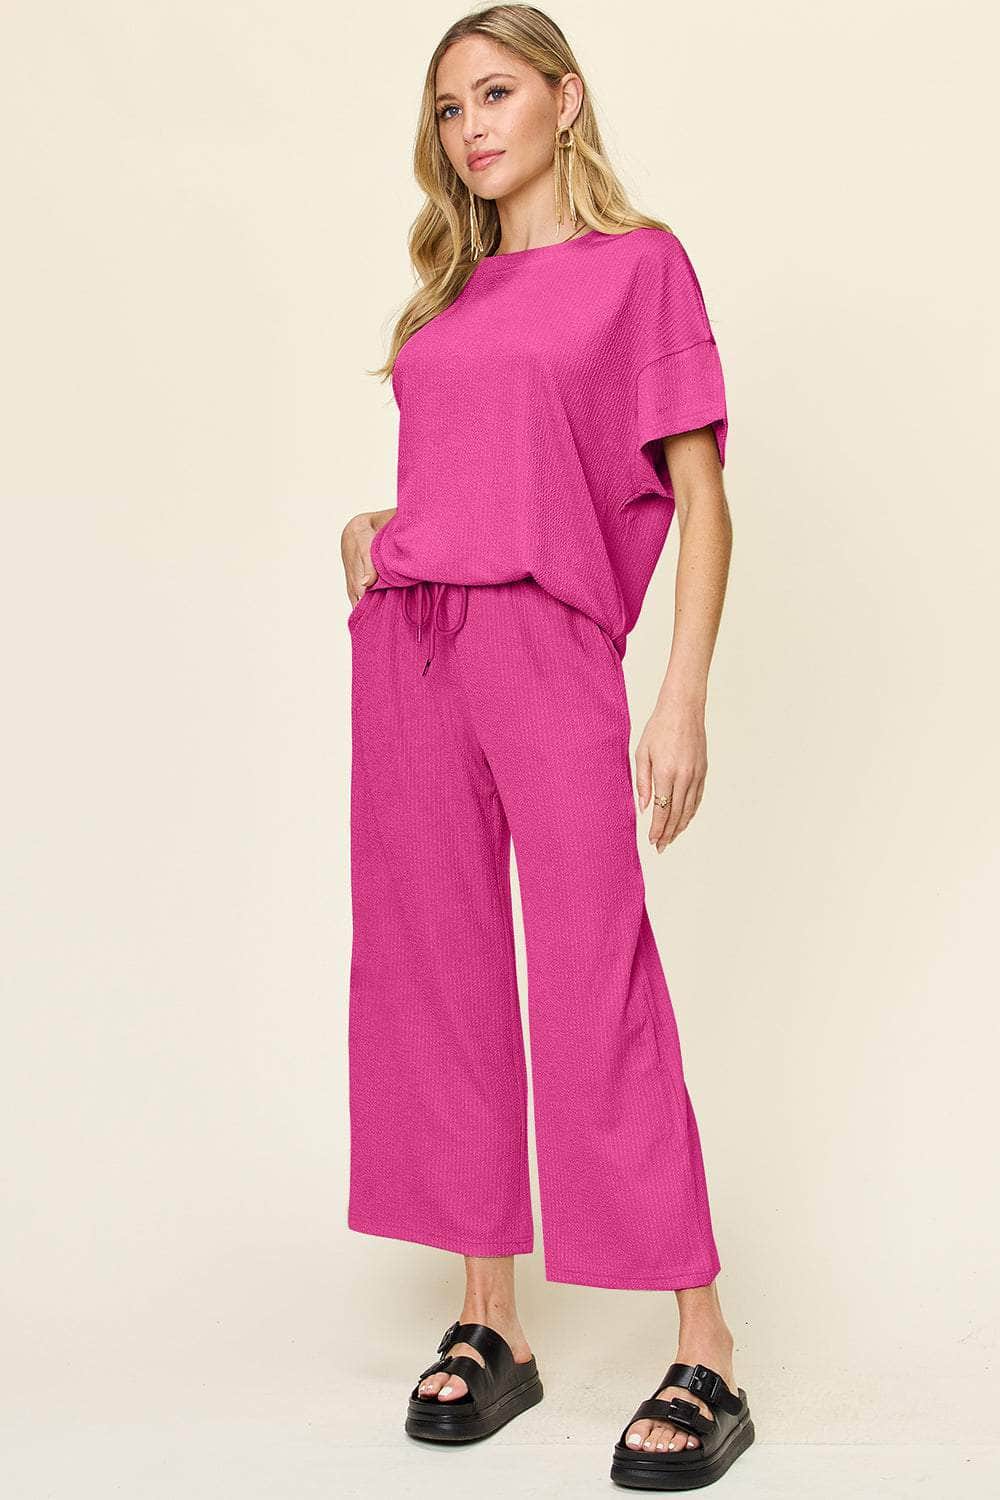 Double Take Full Size Texture Round Neck Short Sleeve T-Shirt and Wide Leg Pants Hot Pink / S